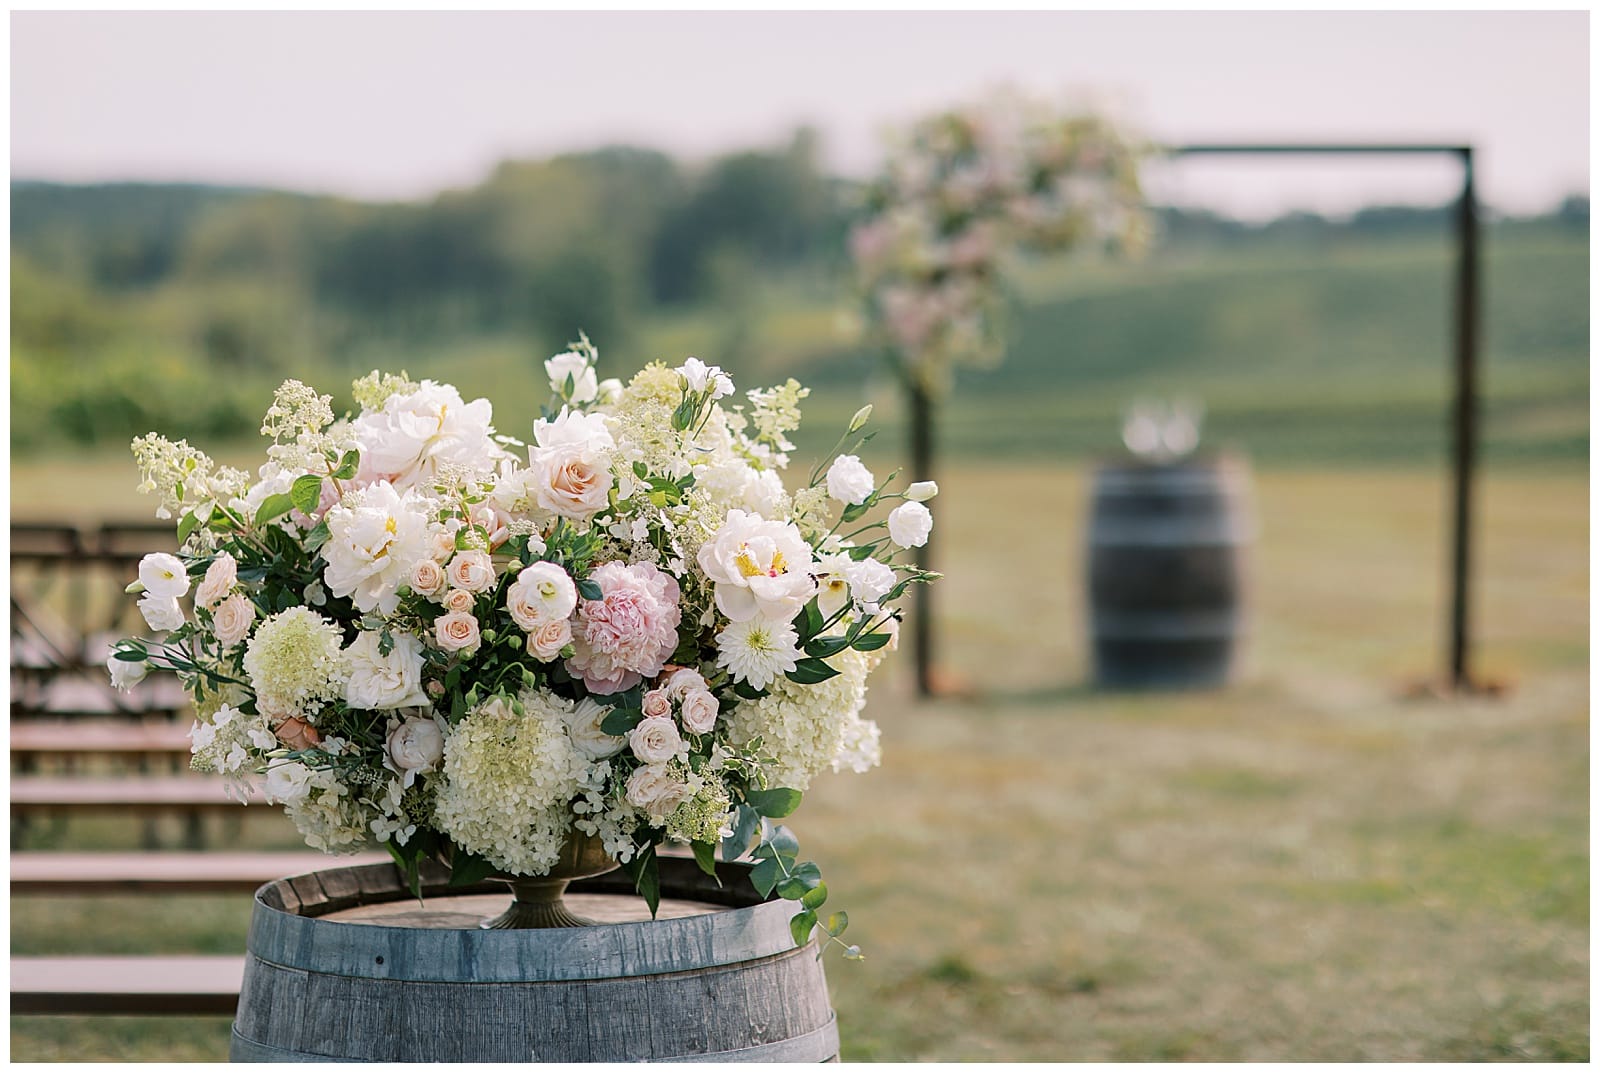 Extremely lovely floral arrangement at the ceremony site at Stone Tower Winery